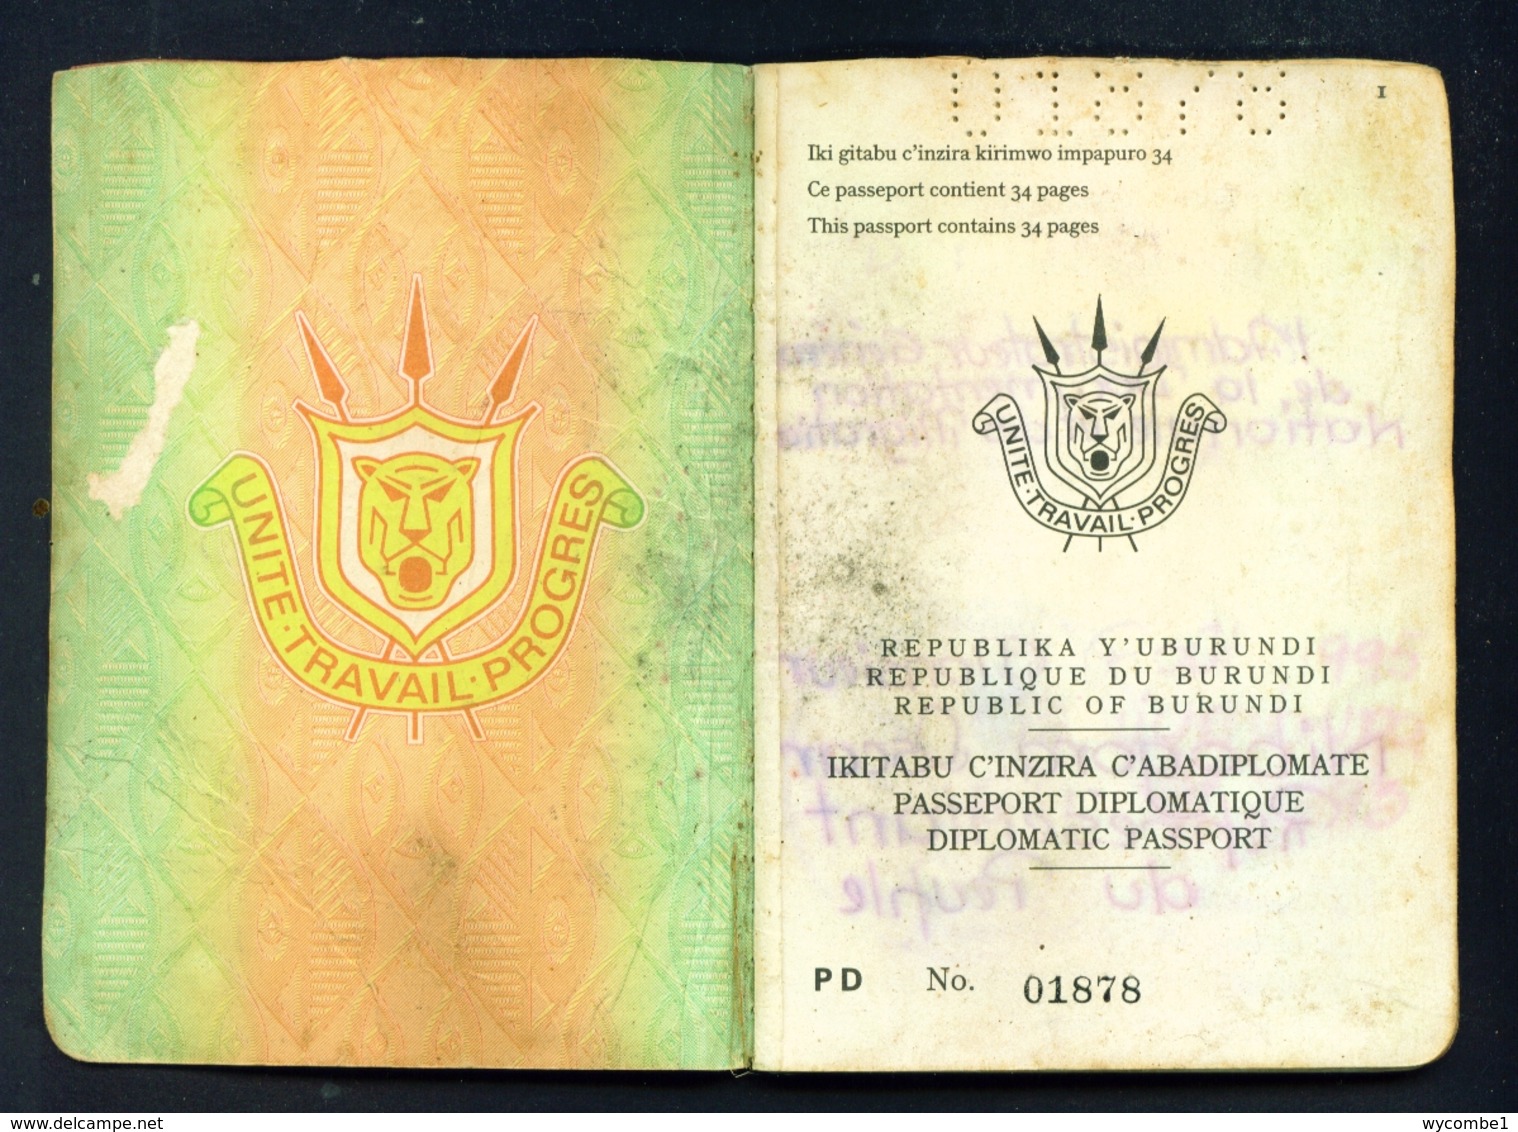 BURUNDI - Expired Diplomatic Passport. Damaged Cover. All Used Visa Pages Scanned - Historical Documents